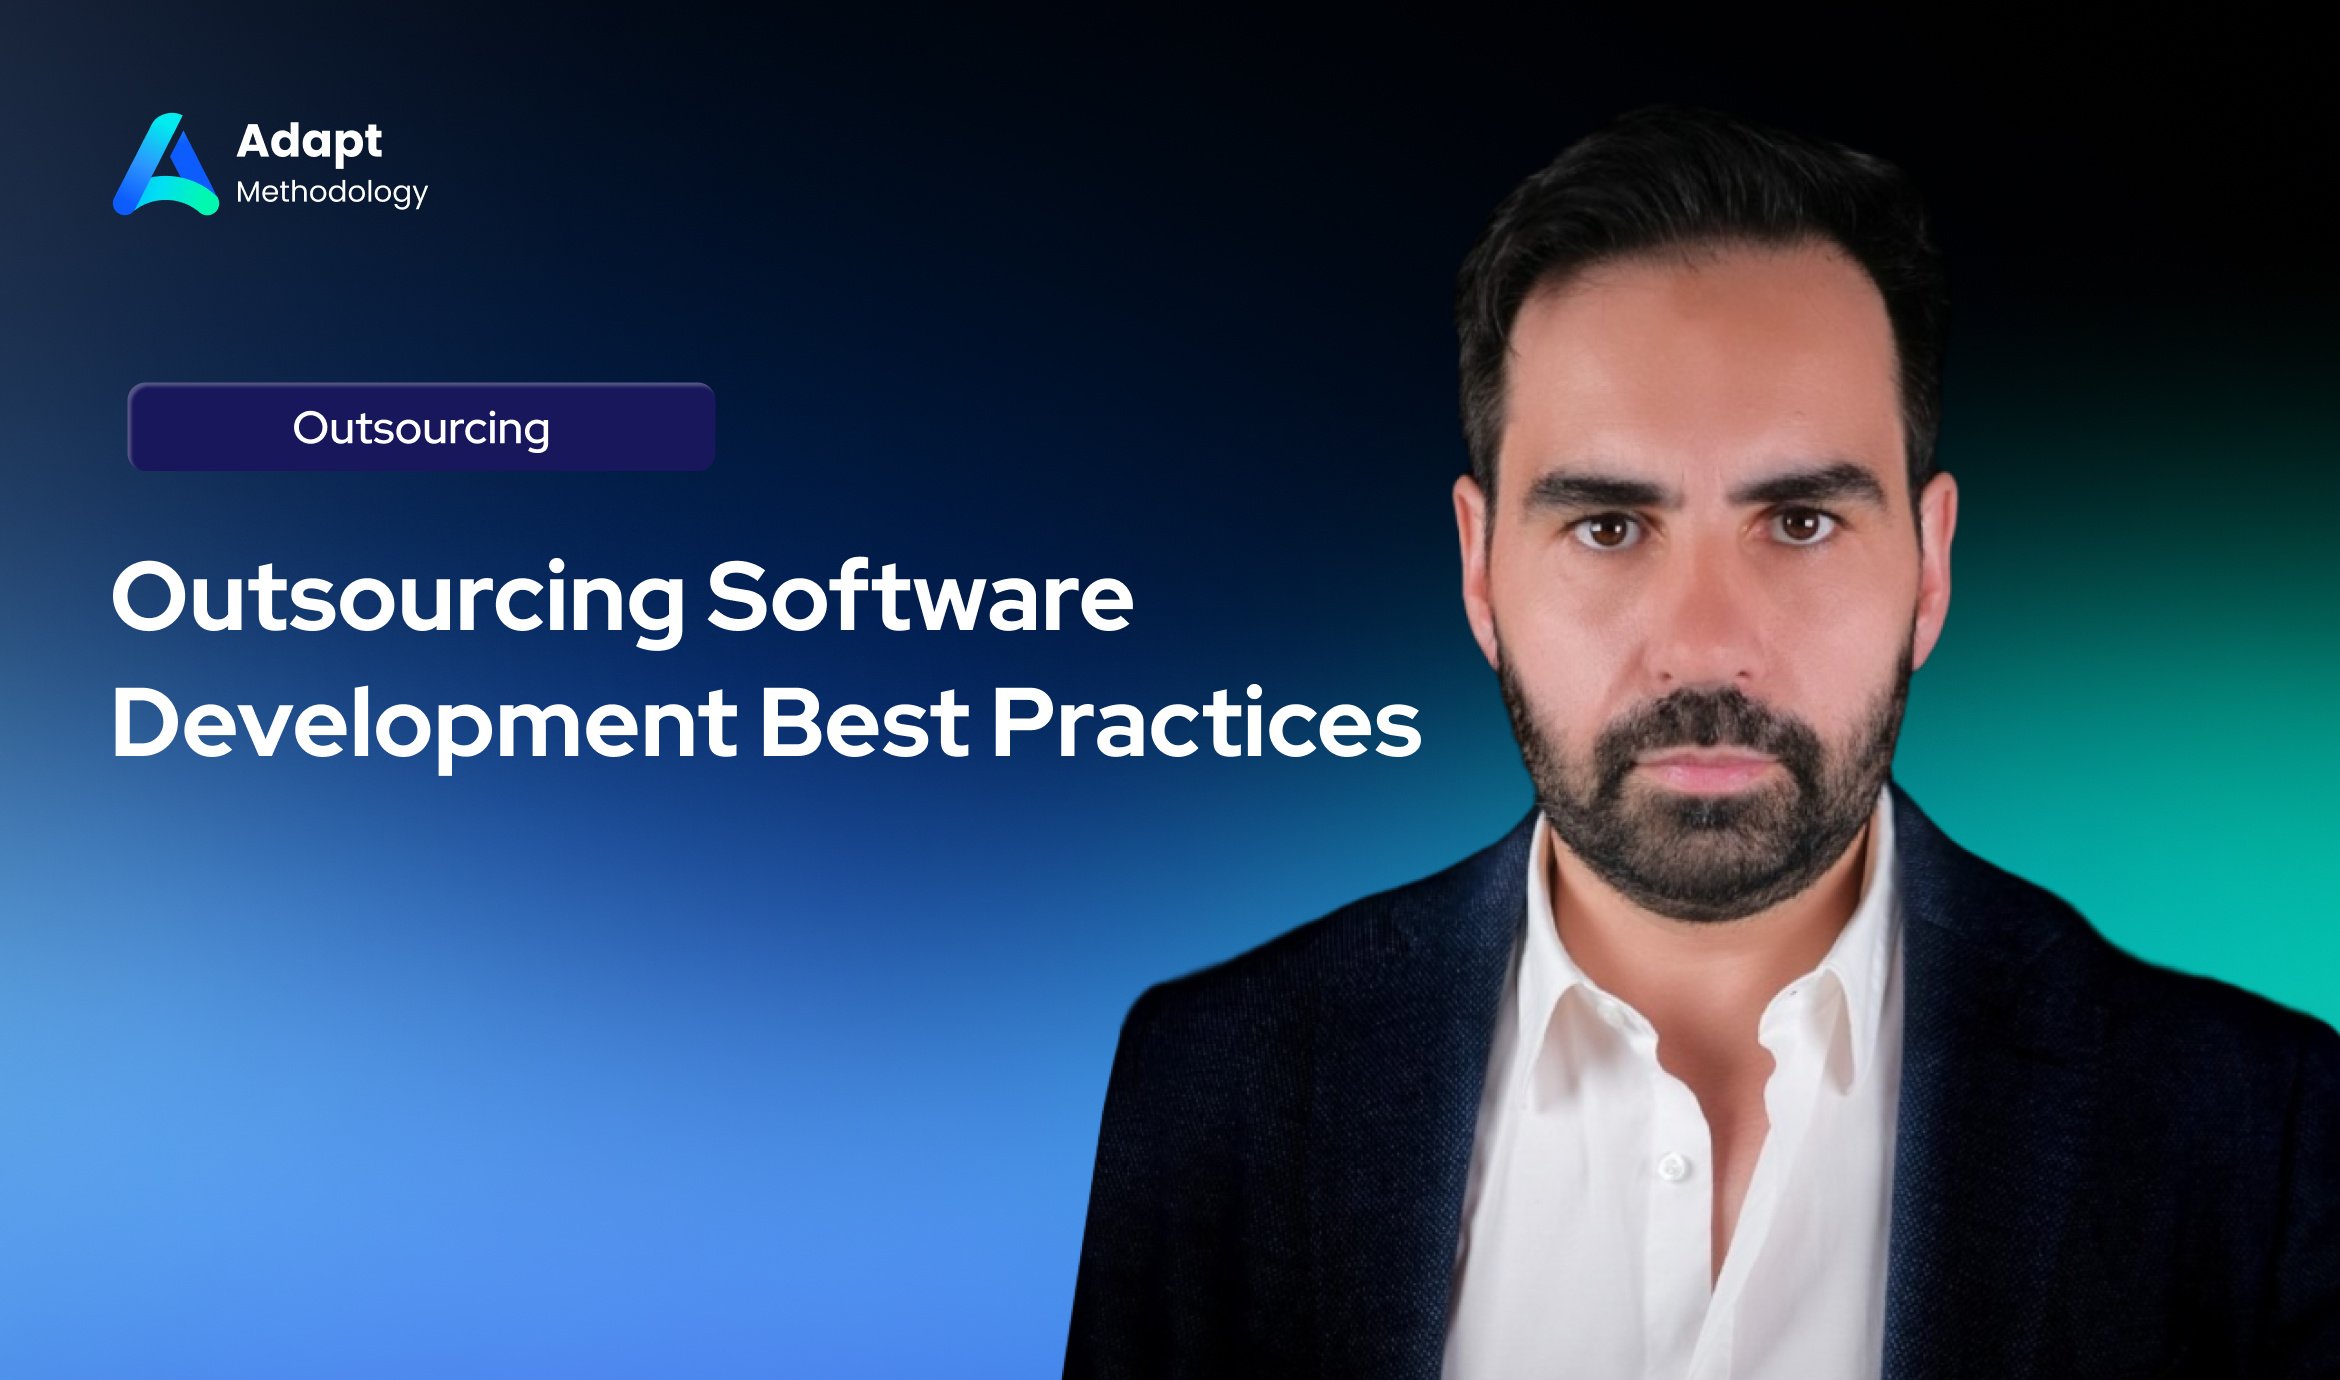 Outsourcing Software Development Best Practices